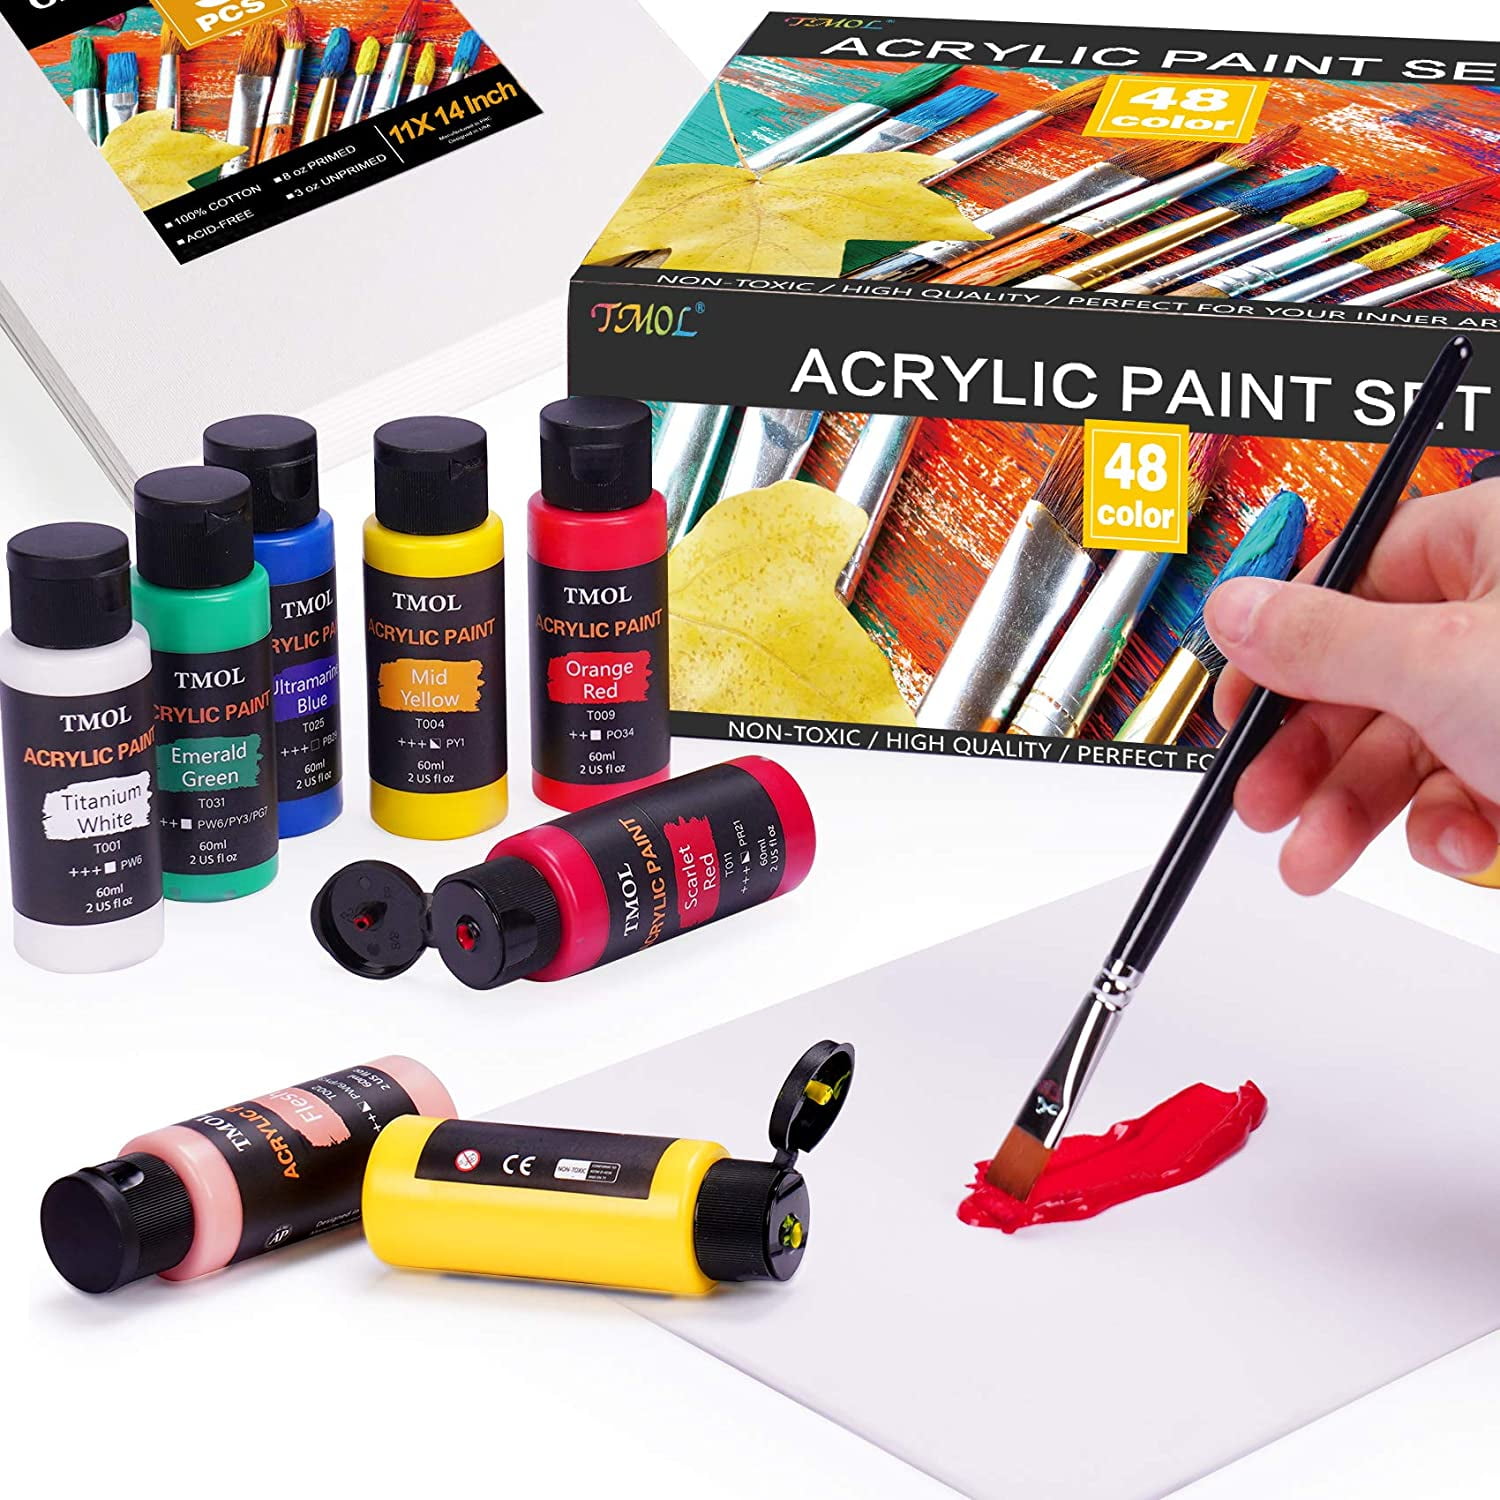 PENTRISTA Acrylic Paint Set,48 Colors Artist Grade Acrylic Paints for Artists,12ml/Tube with 3 Art Brushes & 1 Palette for Beginners and Kids, Craft